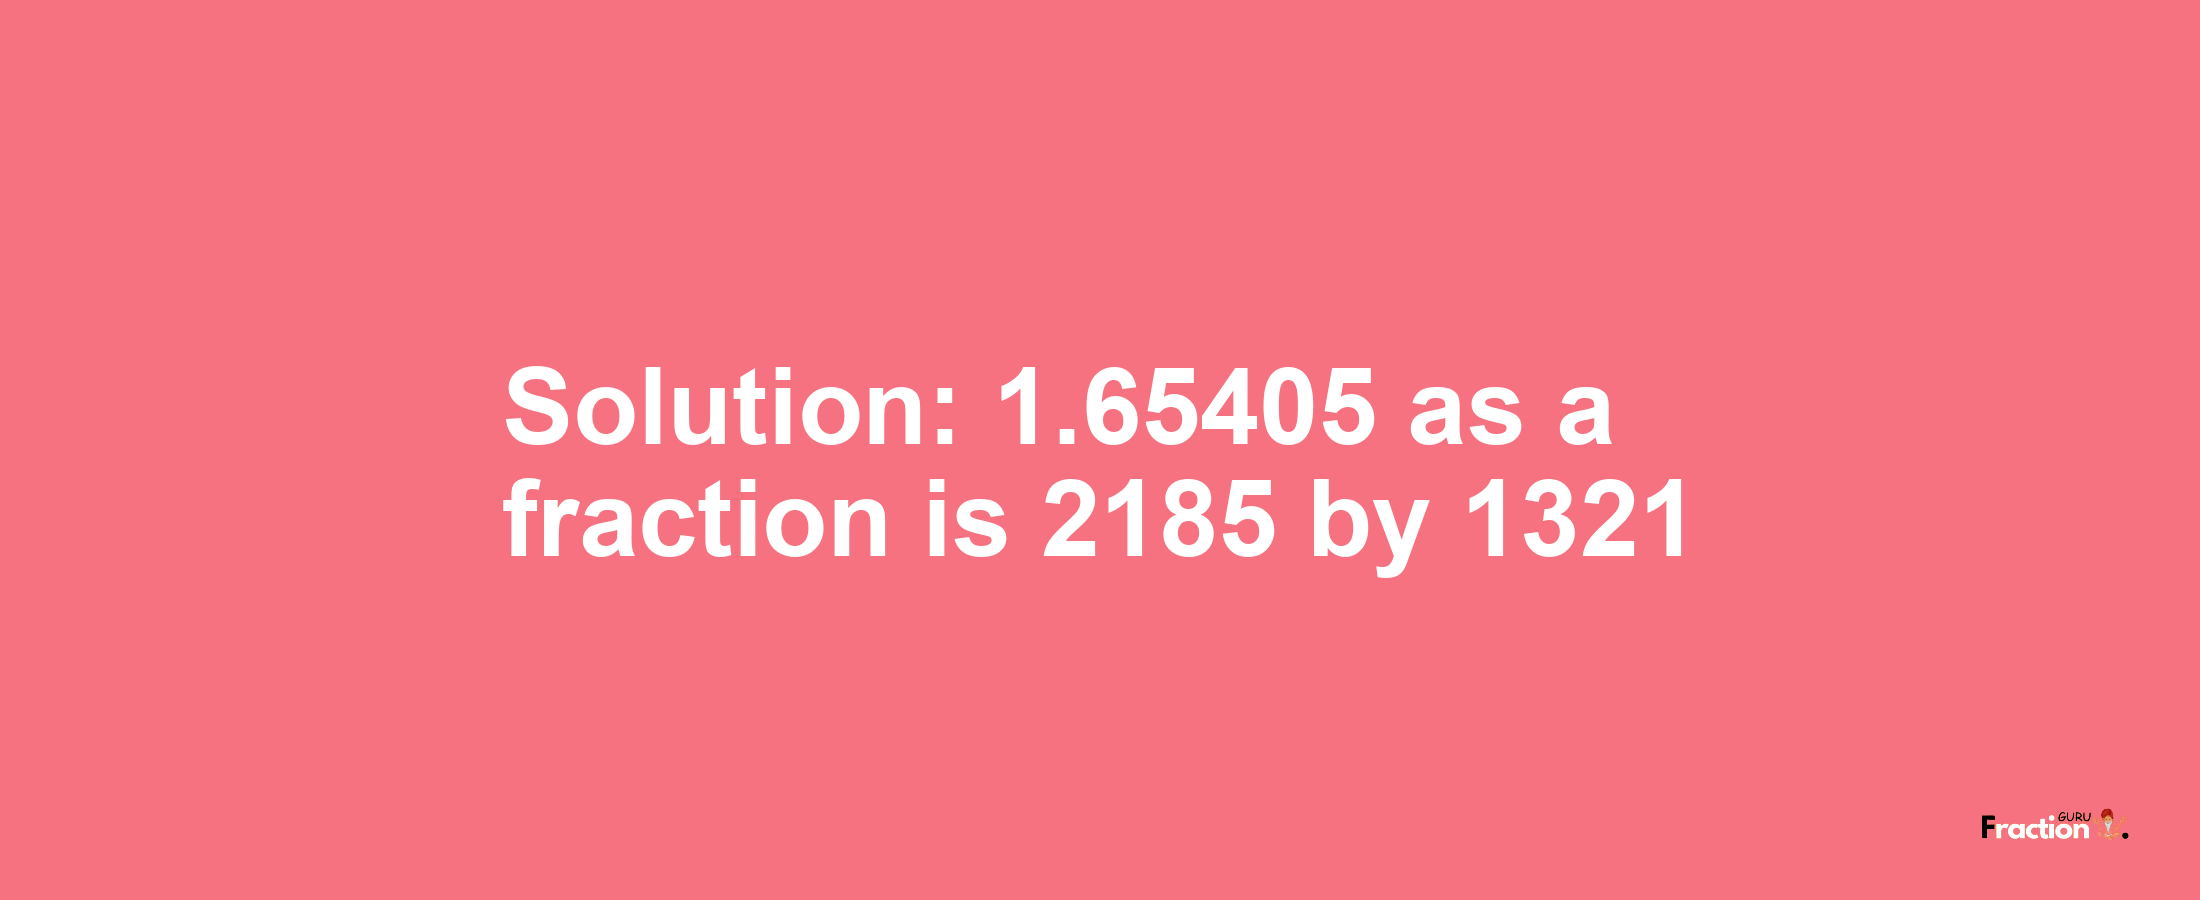 Solution:1.65405 as a fraction is 2185/1321